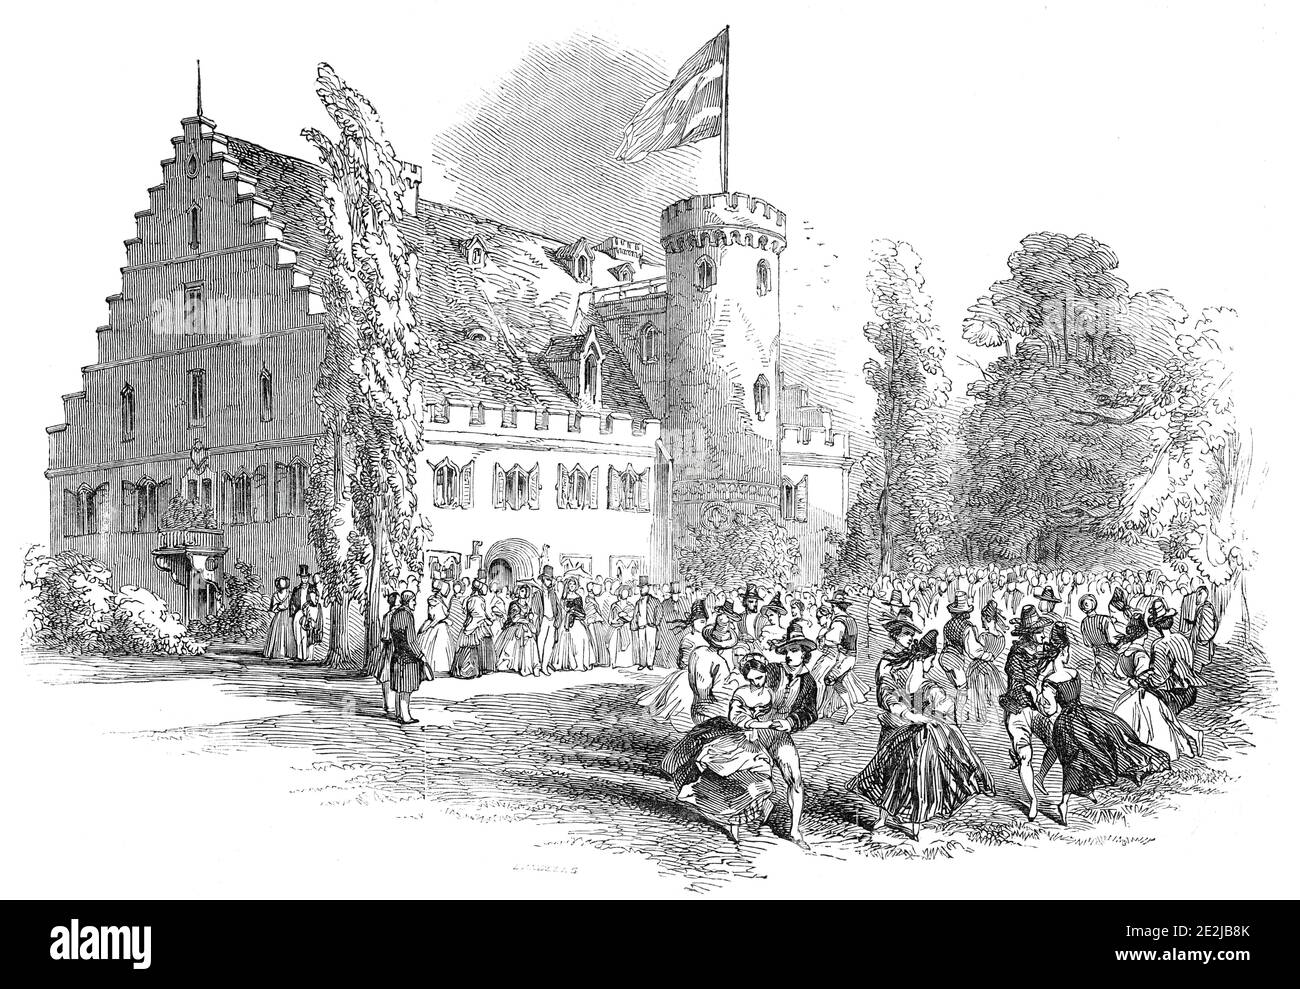 Celebration of His Royal Highness Prince Albert's birthday, at Rosenau, 1845. Dancers at the birthplace and boyhood home of Prince Albert in Germany. '...thirteen or fourteen couples - each lad with a lass - dressed in the extreme of the Coburg rural costume...the band struck up, and in a moment the lawn was covered with waltzers, the bright coloured dresses and flowing ribbons flashing along in strong and agreeable contrast with the surrounding trees and shrubs...At the close of the fifth or sixth waltz, the procession formed again, filed before her Majesty and the Prince; and, in the order i Stock Photo